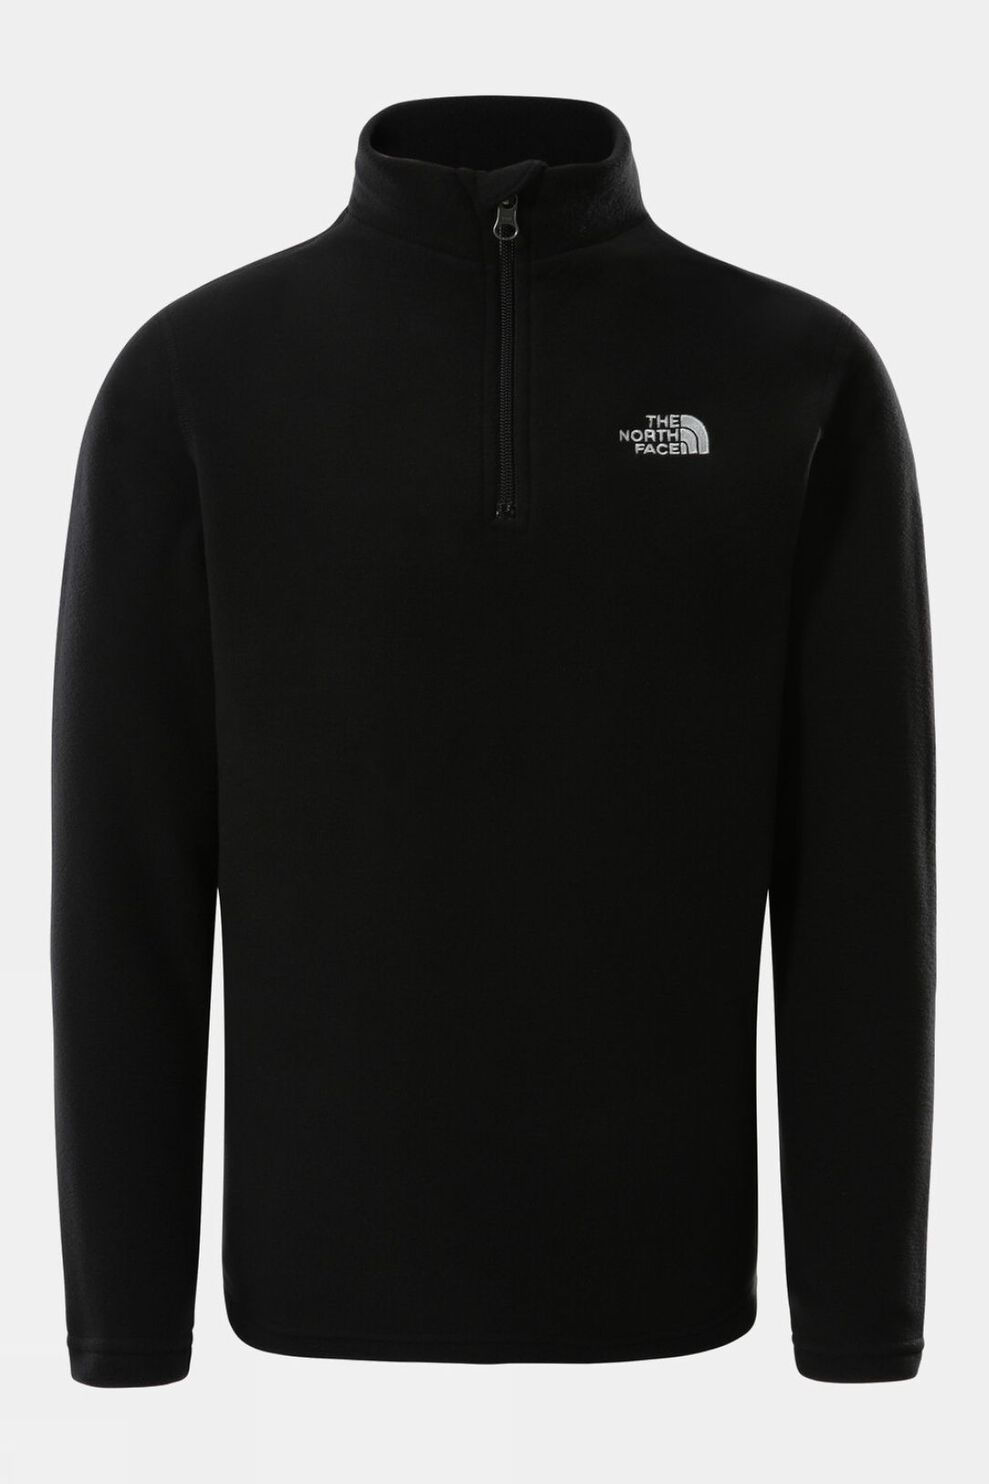 The North Face Youth Glacier 1/4 Zip Recycled Fleece